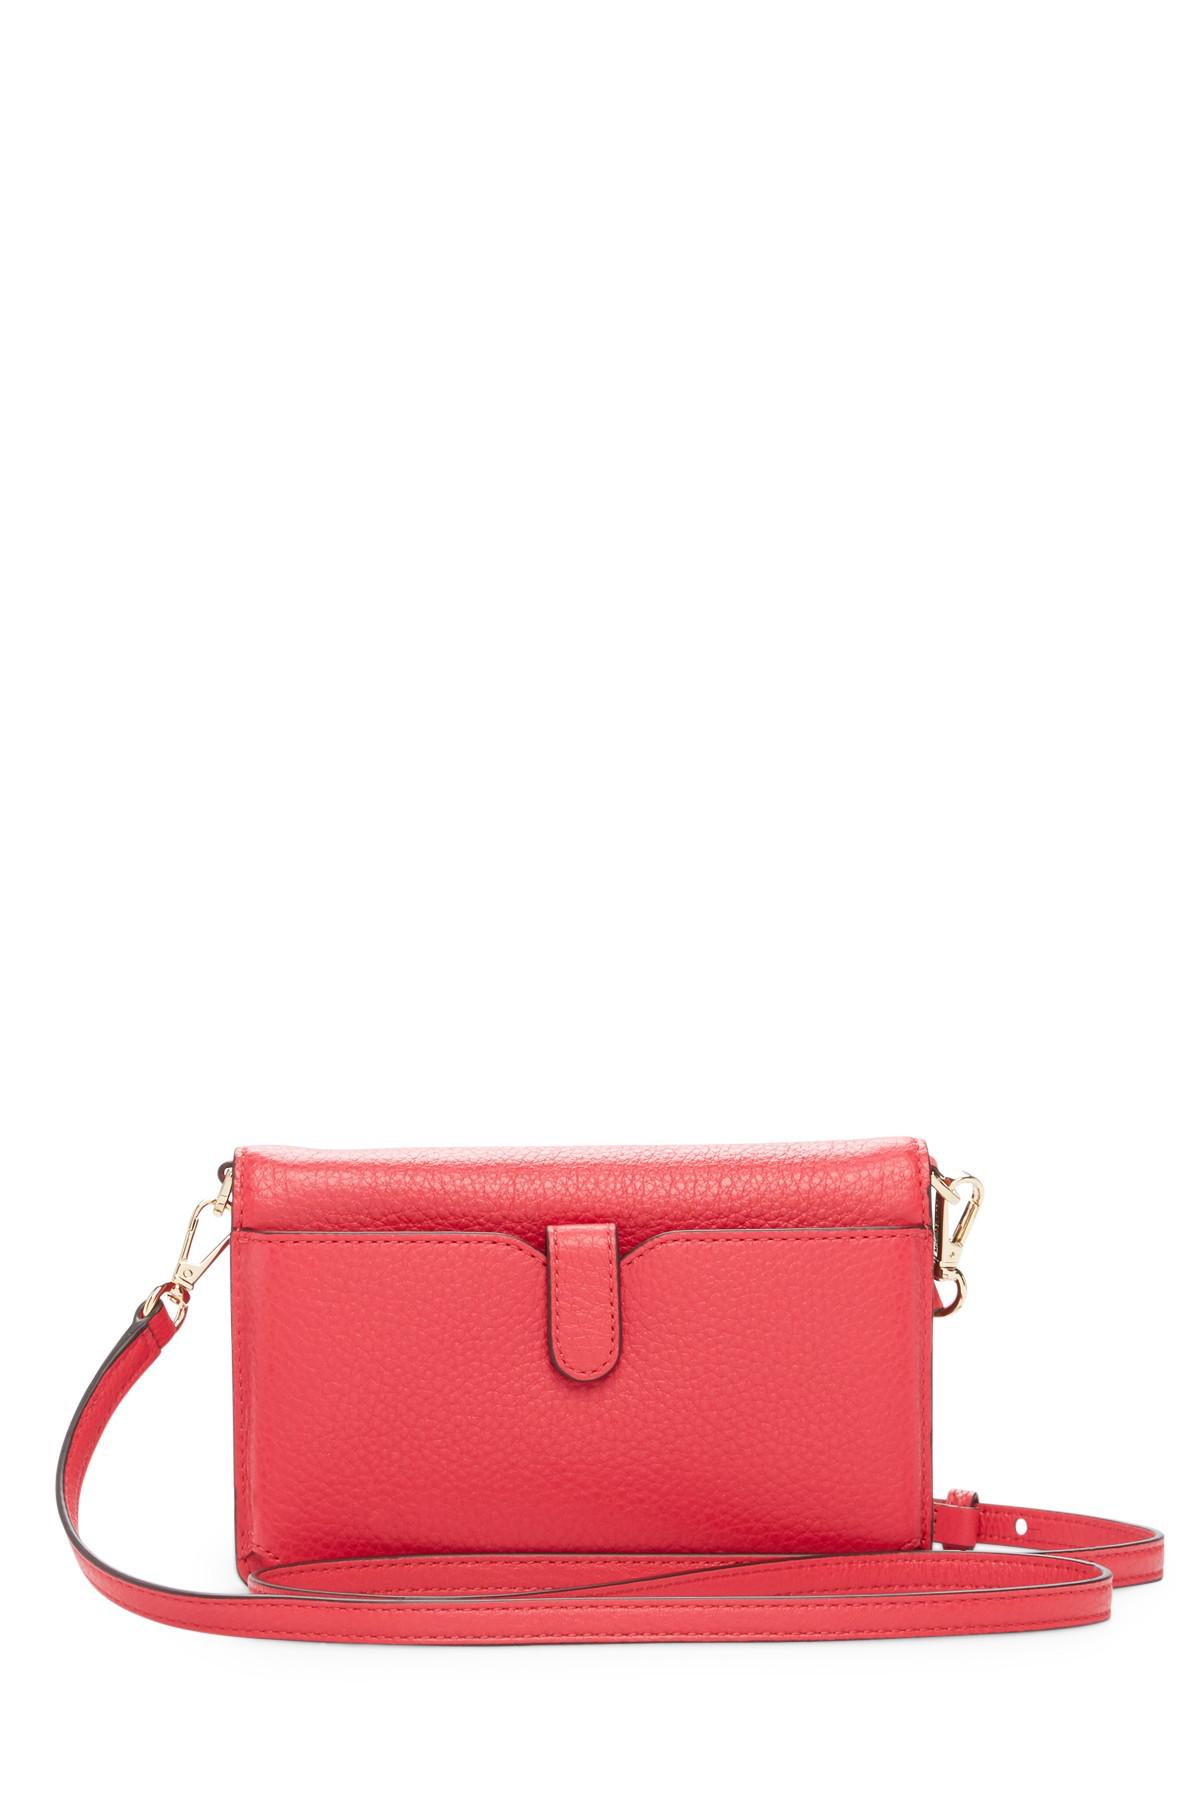 Lyst - Michael Michael Kors Floral Embellished Leather Phone Crossbody Bag in Pink